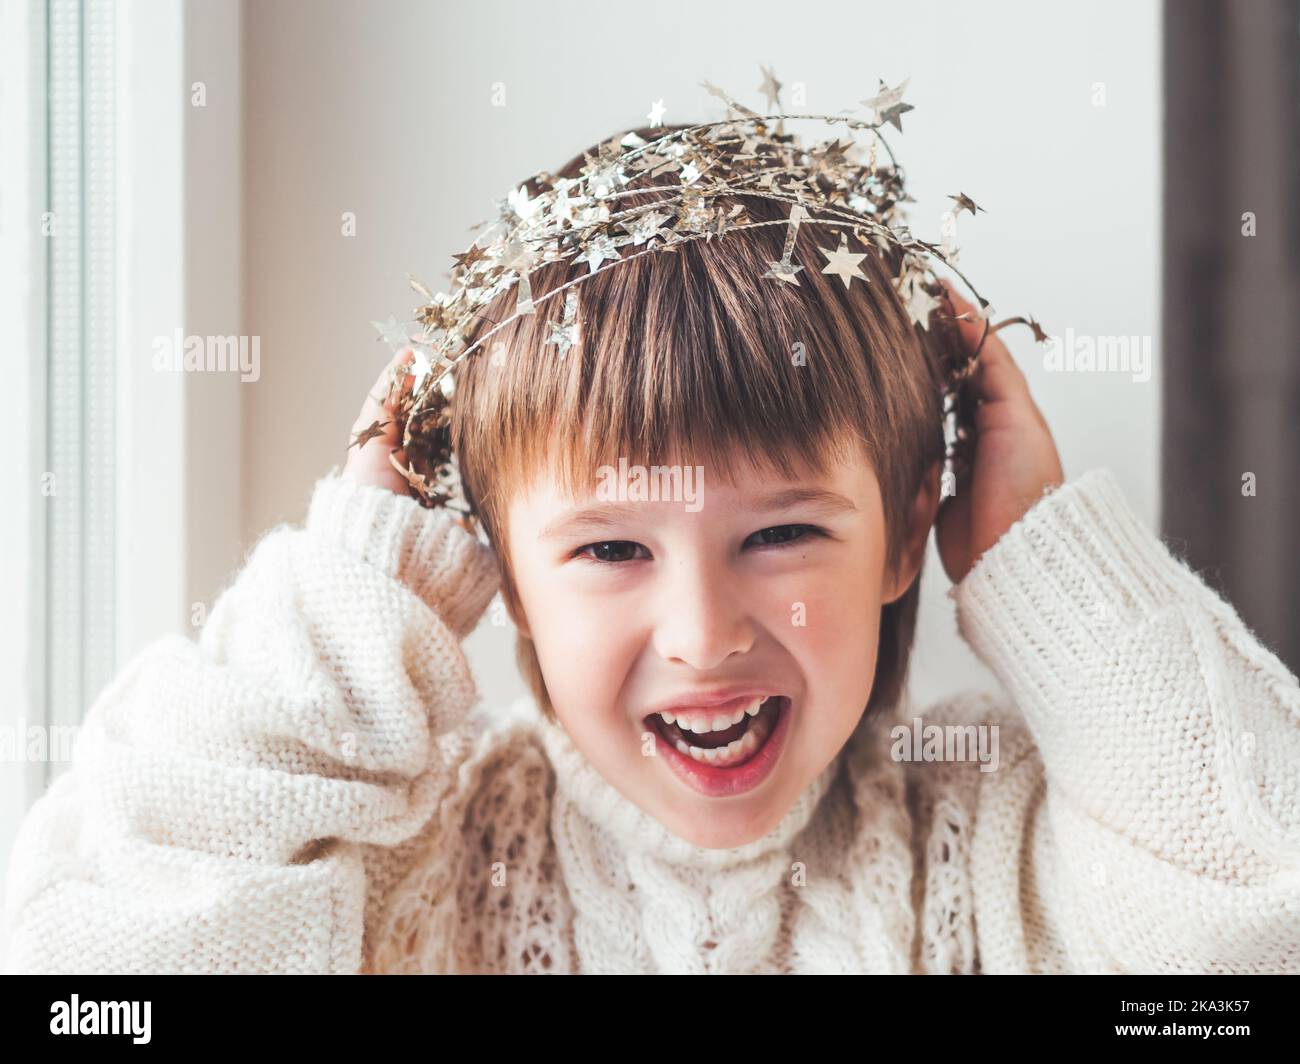 Kid with decorative star tinsel for Christmas tree. Boy in cable-knit oversized sweater. Cozy outfit for snuggle weather. Winter holiday spirit. Stock Photo